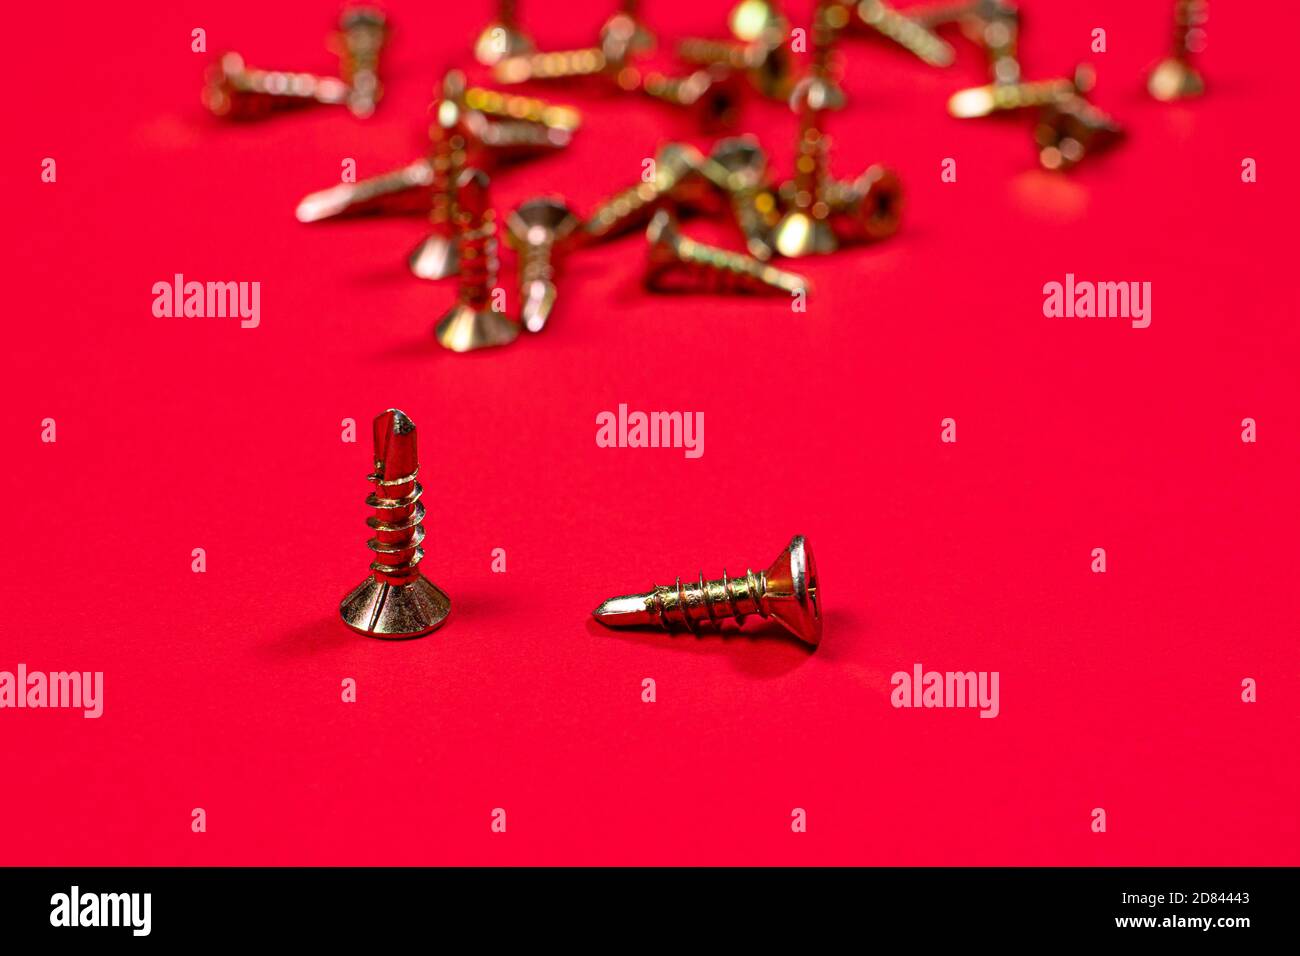 Self-cutters on a bright red background. Furniture and parts for repair and construction Stock Photo